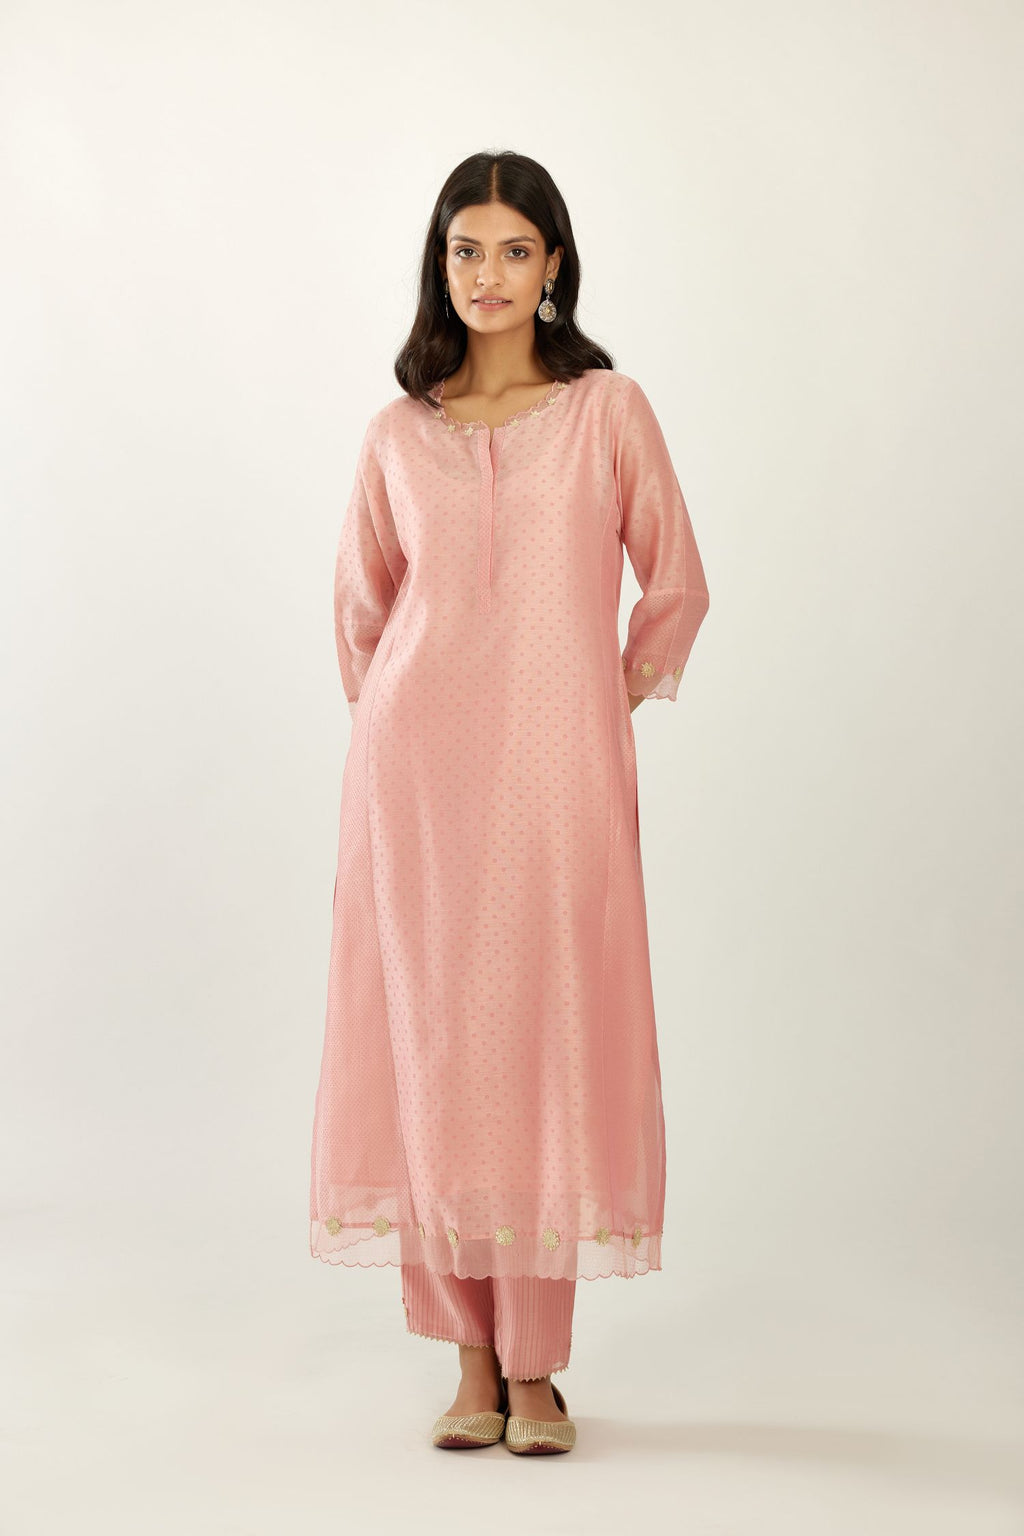 Pink hand block printed silk chanderi kurta set with concealed button placket neckline, Highlighted with gota flower and scalloped organza at edges.